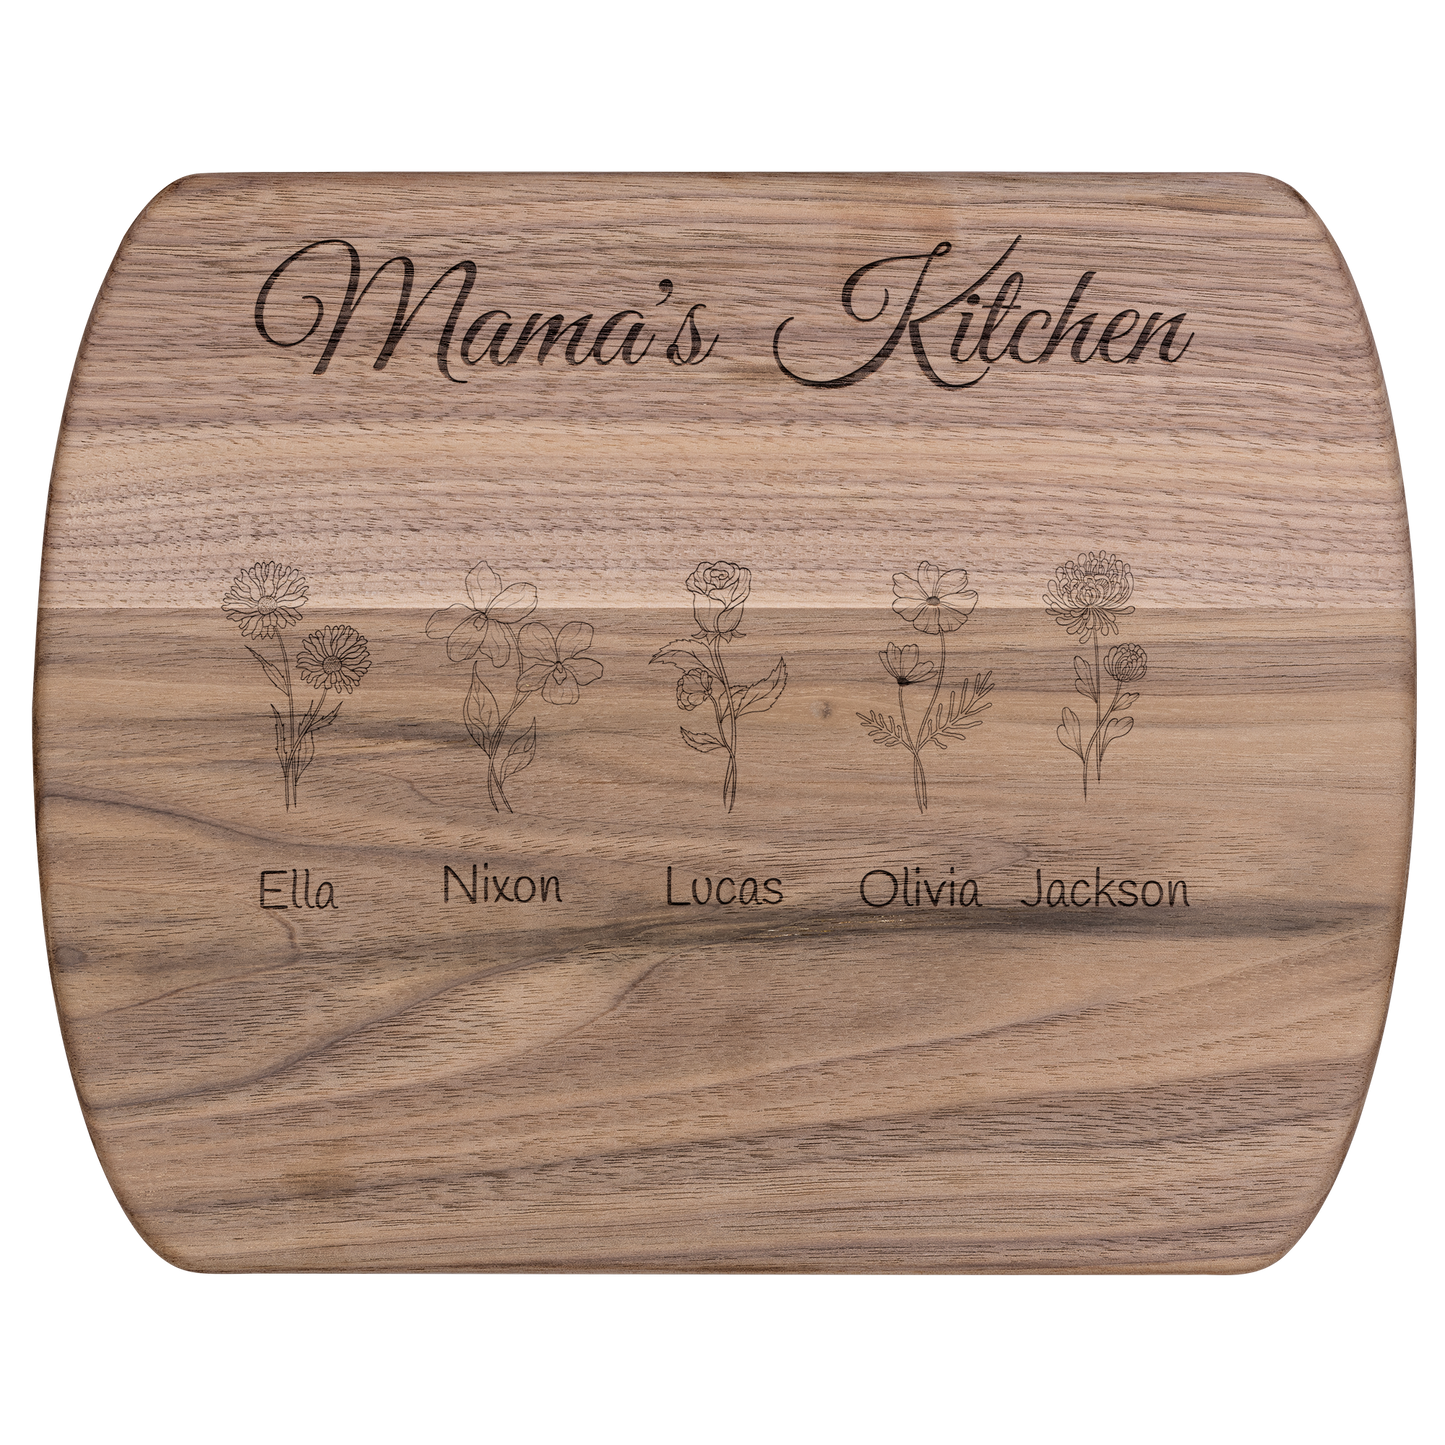 Get trendy with Mama's Kitchen Hardwood Oval Cutting Board -  available at Good Gift Company. Grab yours for $18.50 today!